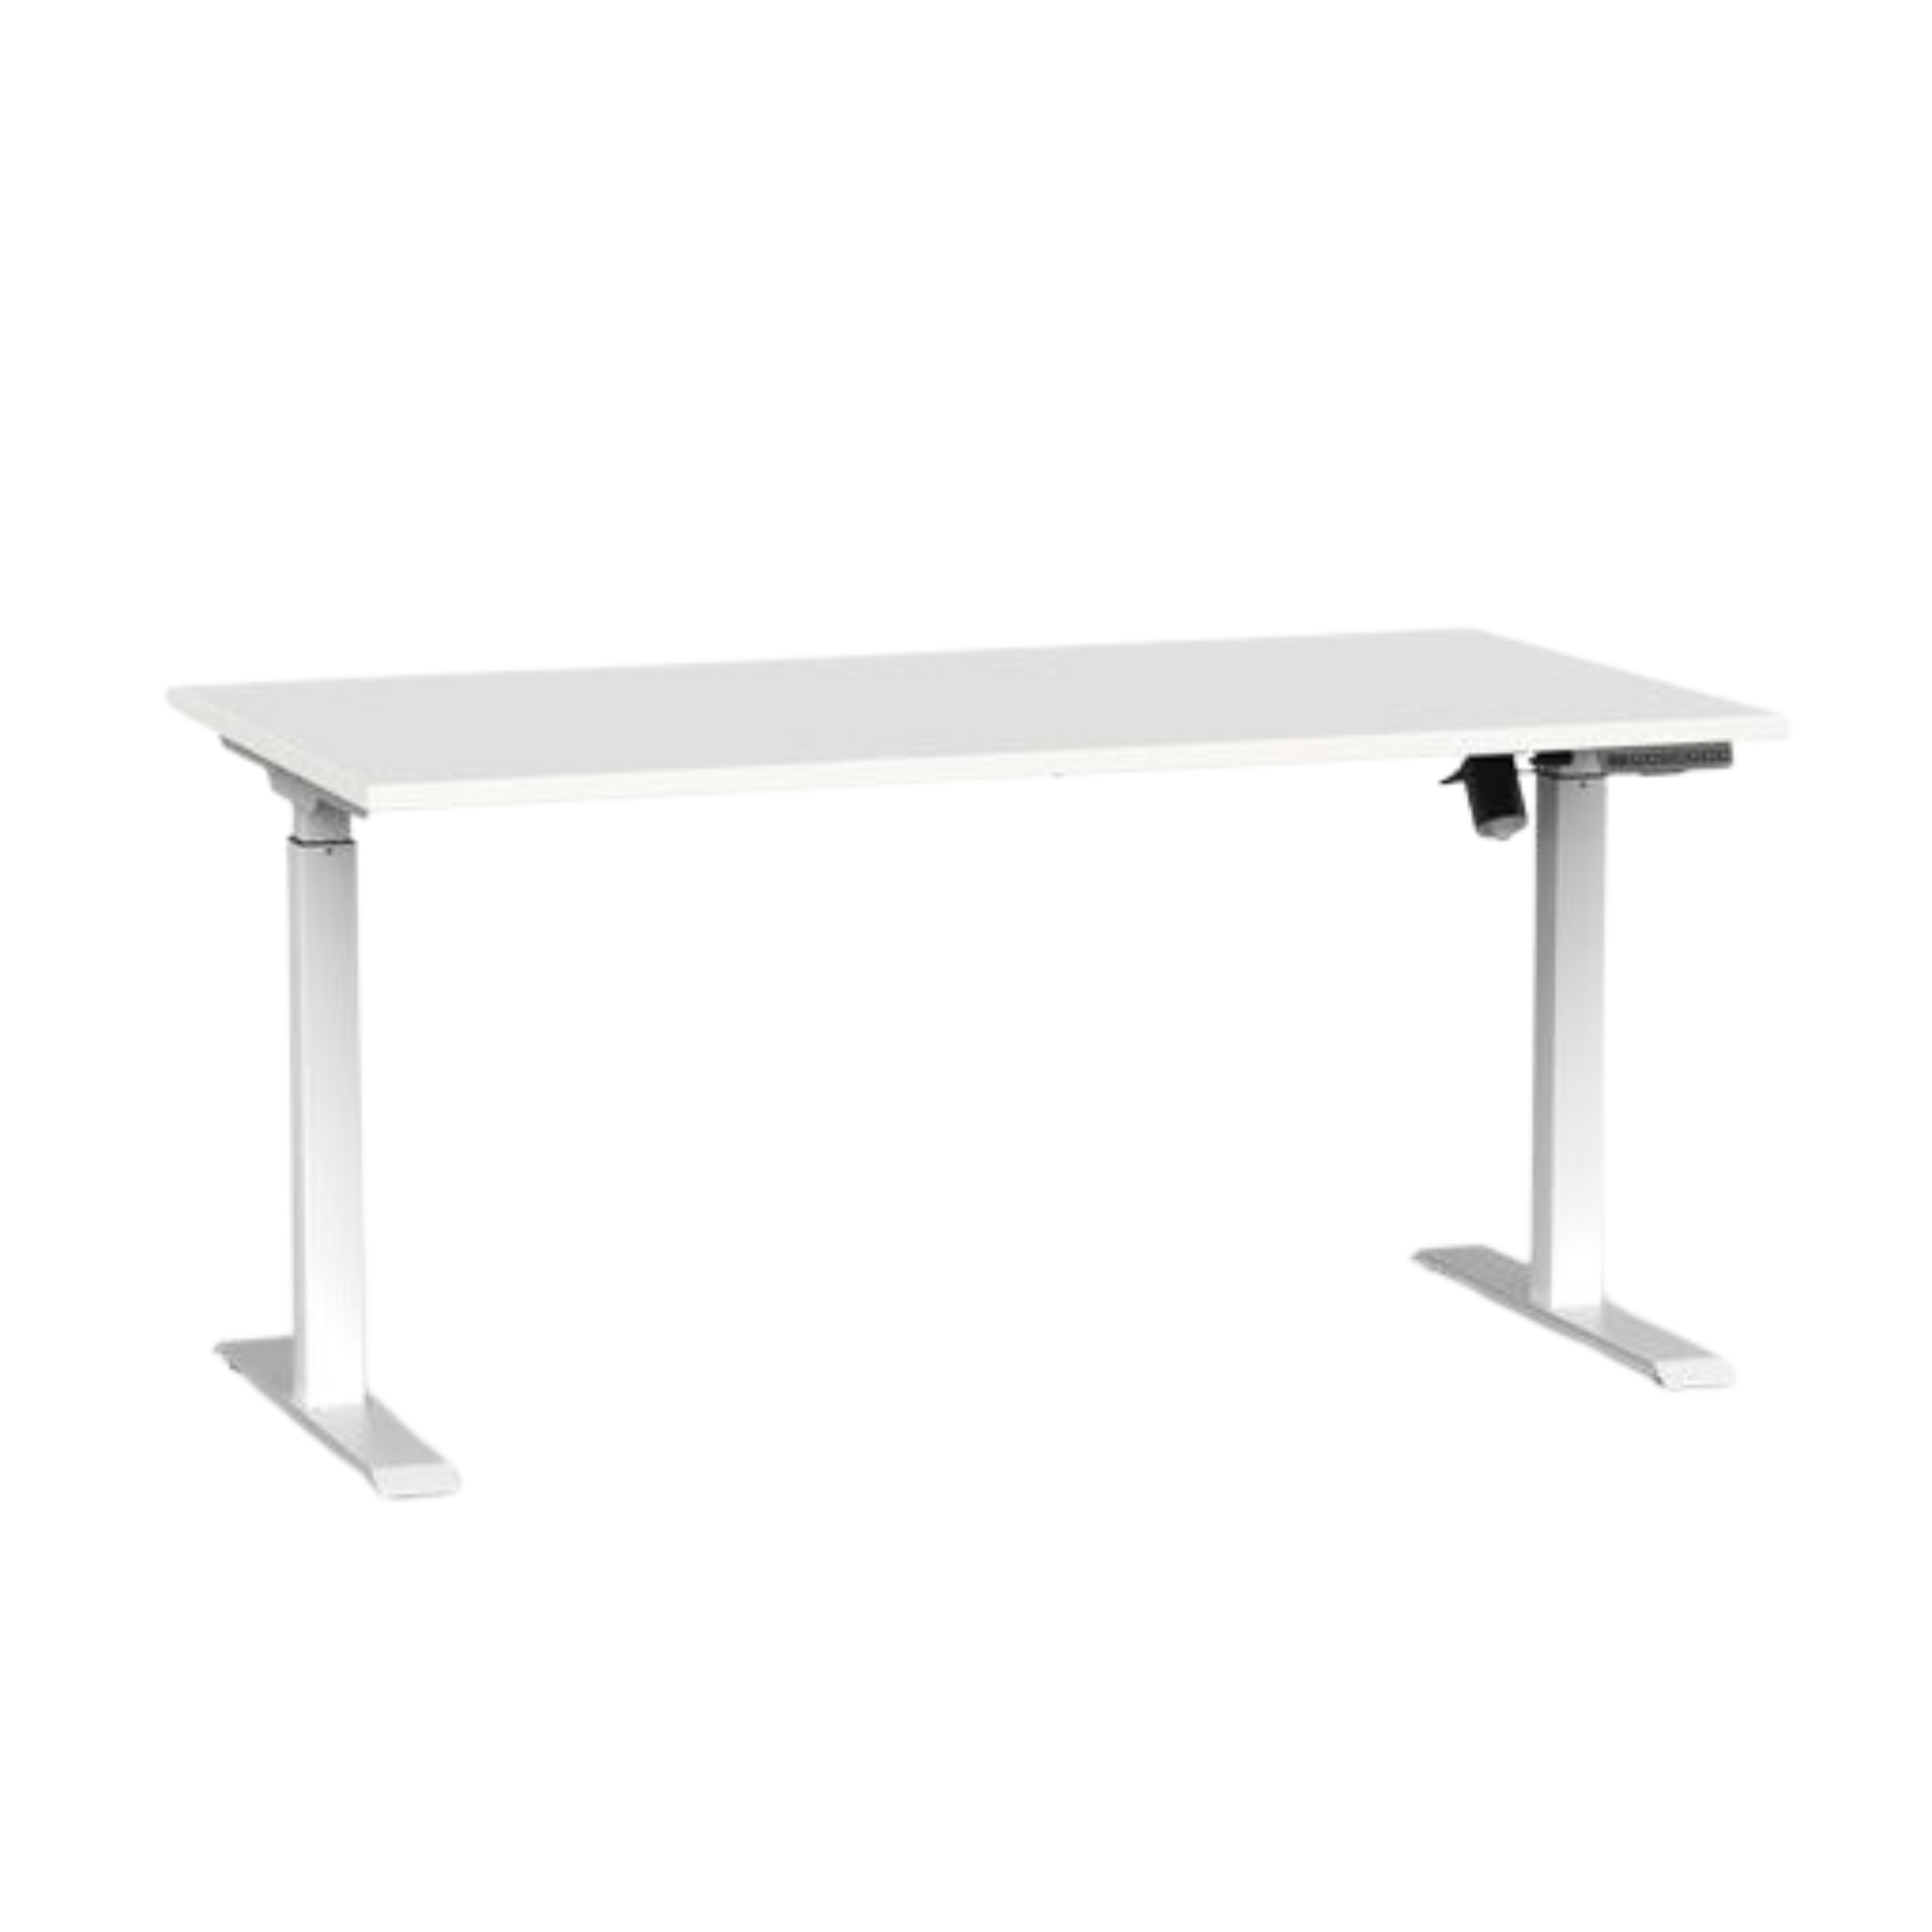 Agile boost electric sit to stand desk with white frame and white top